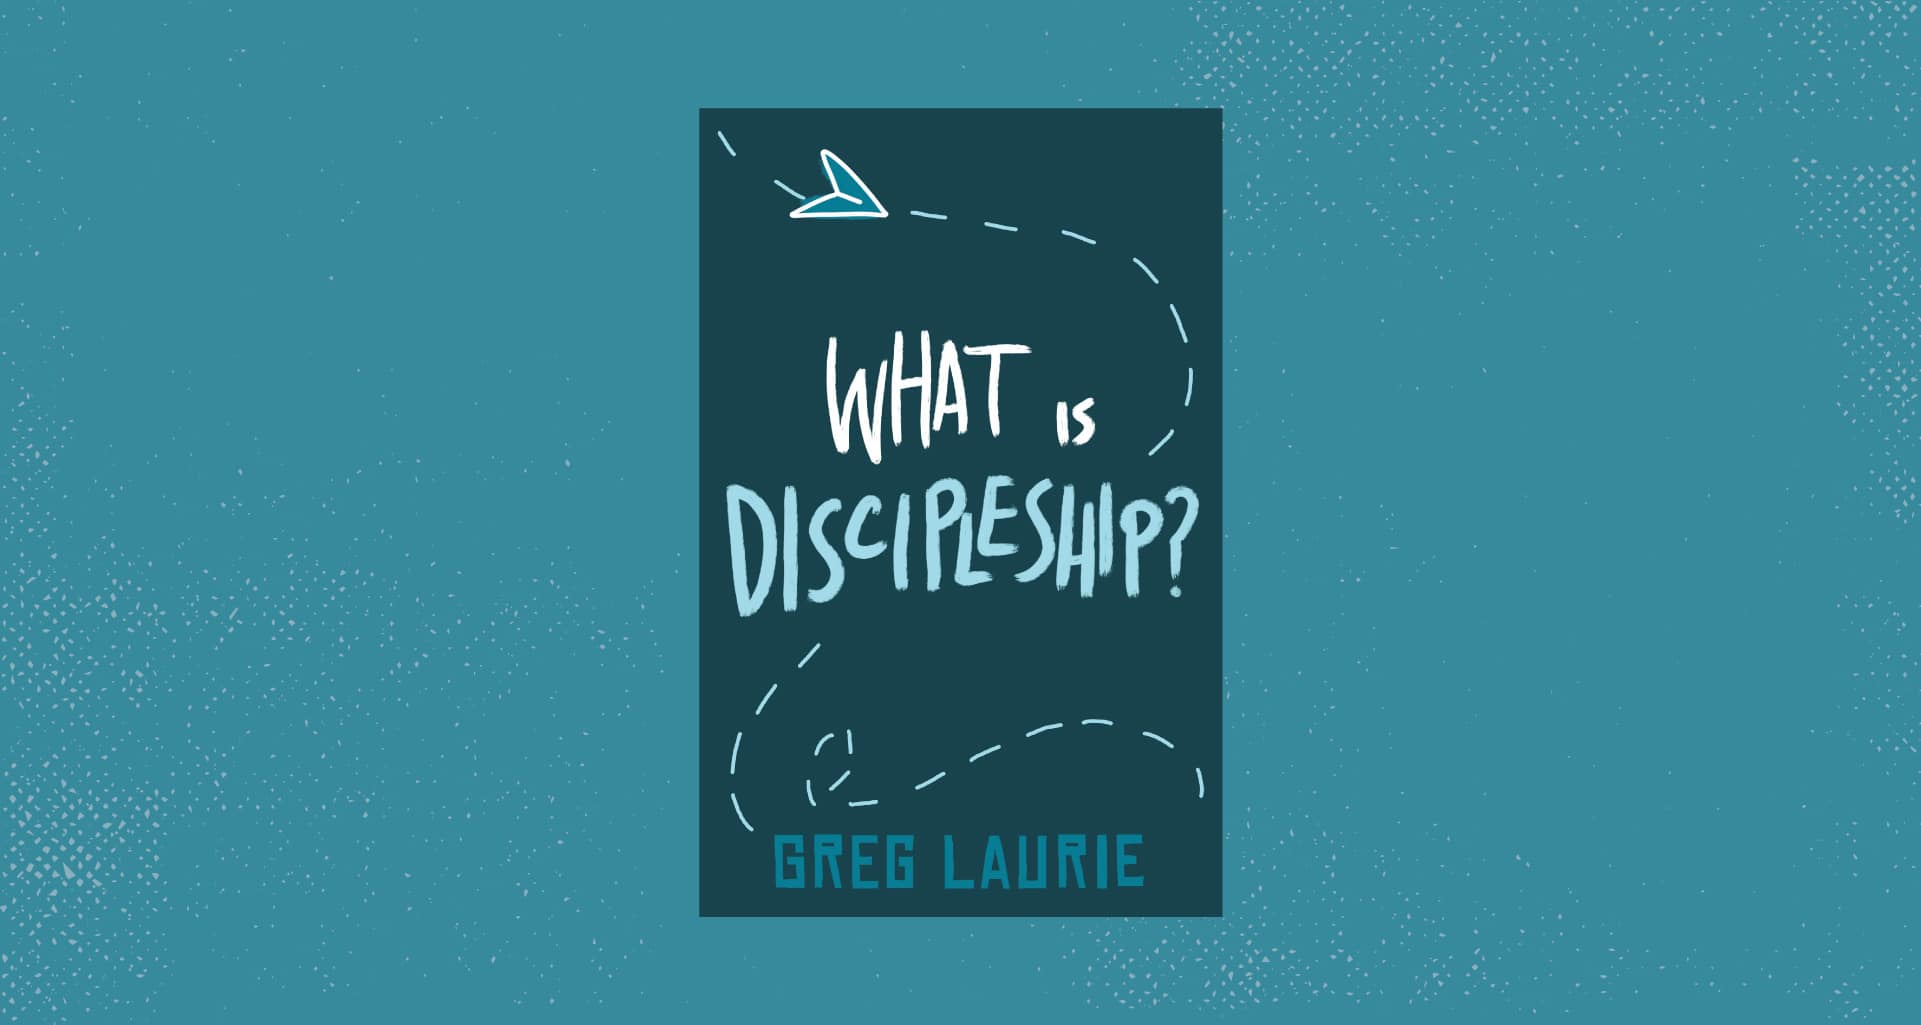 what is is discipleship greg laurie e-book cover